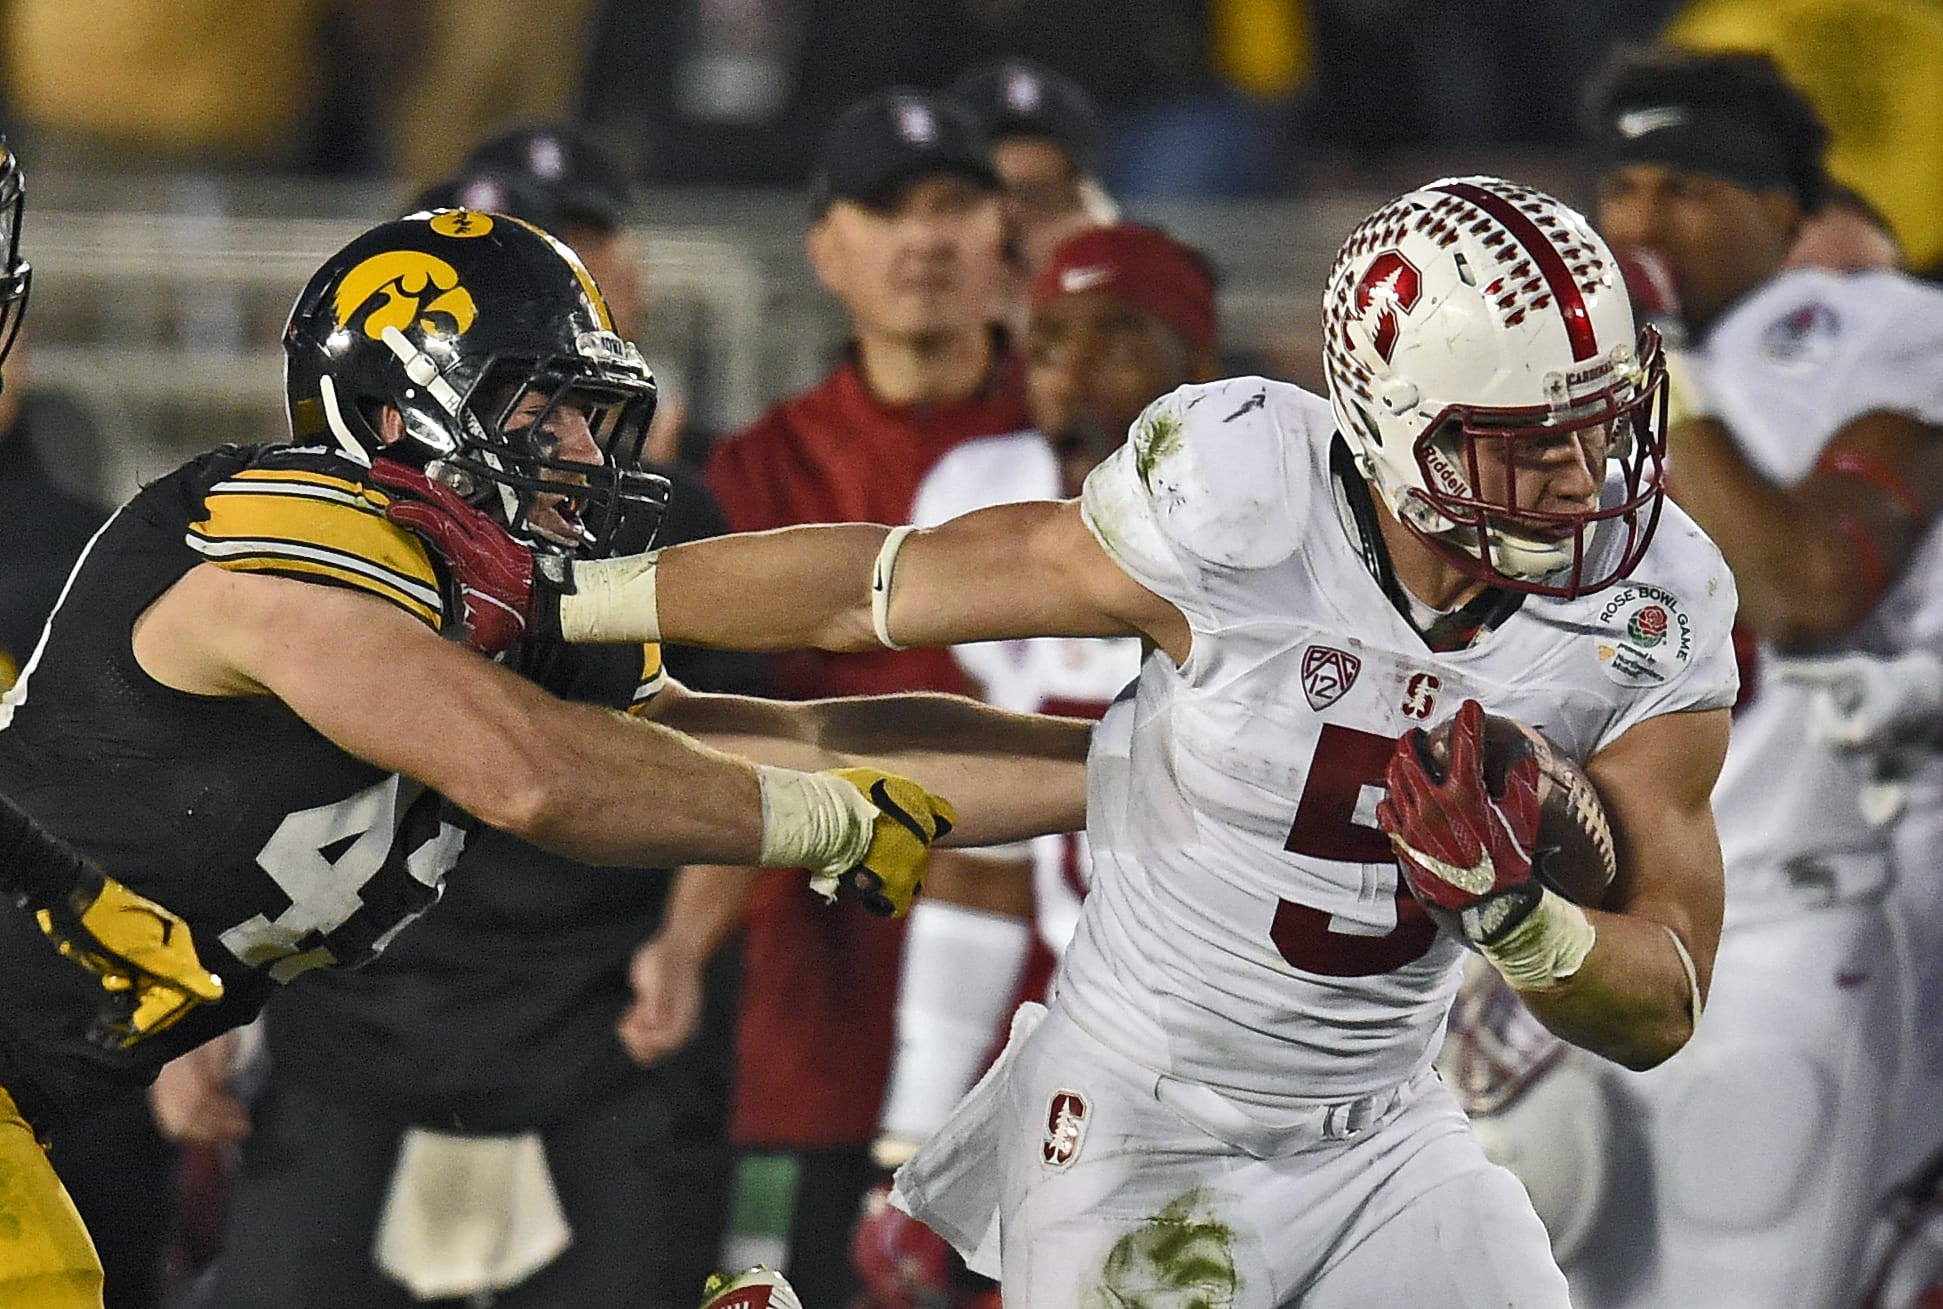 Stanford running back Christian McCaffrey, right, breaks away form Iowa linebacker Josey Jewell during the second half of the Rose Bowl NCAA college football game, Friday, Jan. 1, 2016, in Pasadena, Calif. (AP Photo/Mark J.